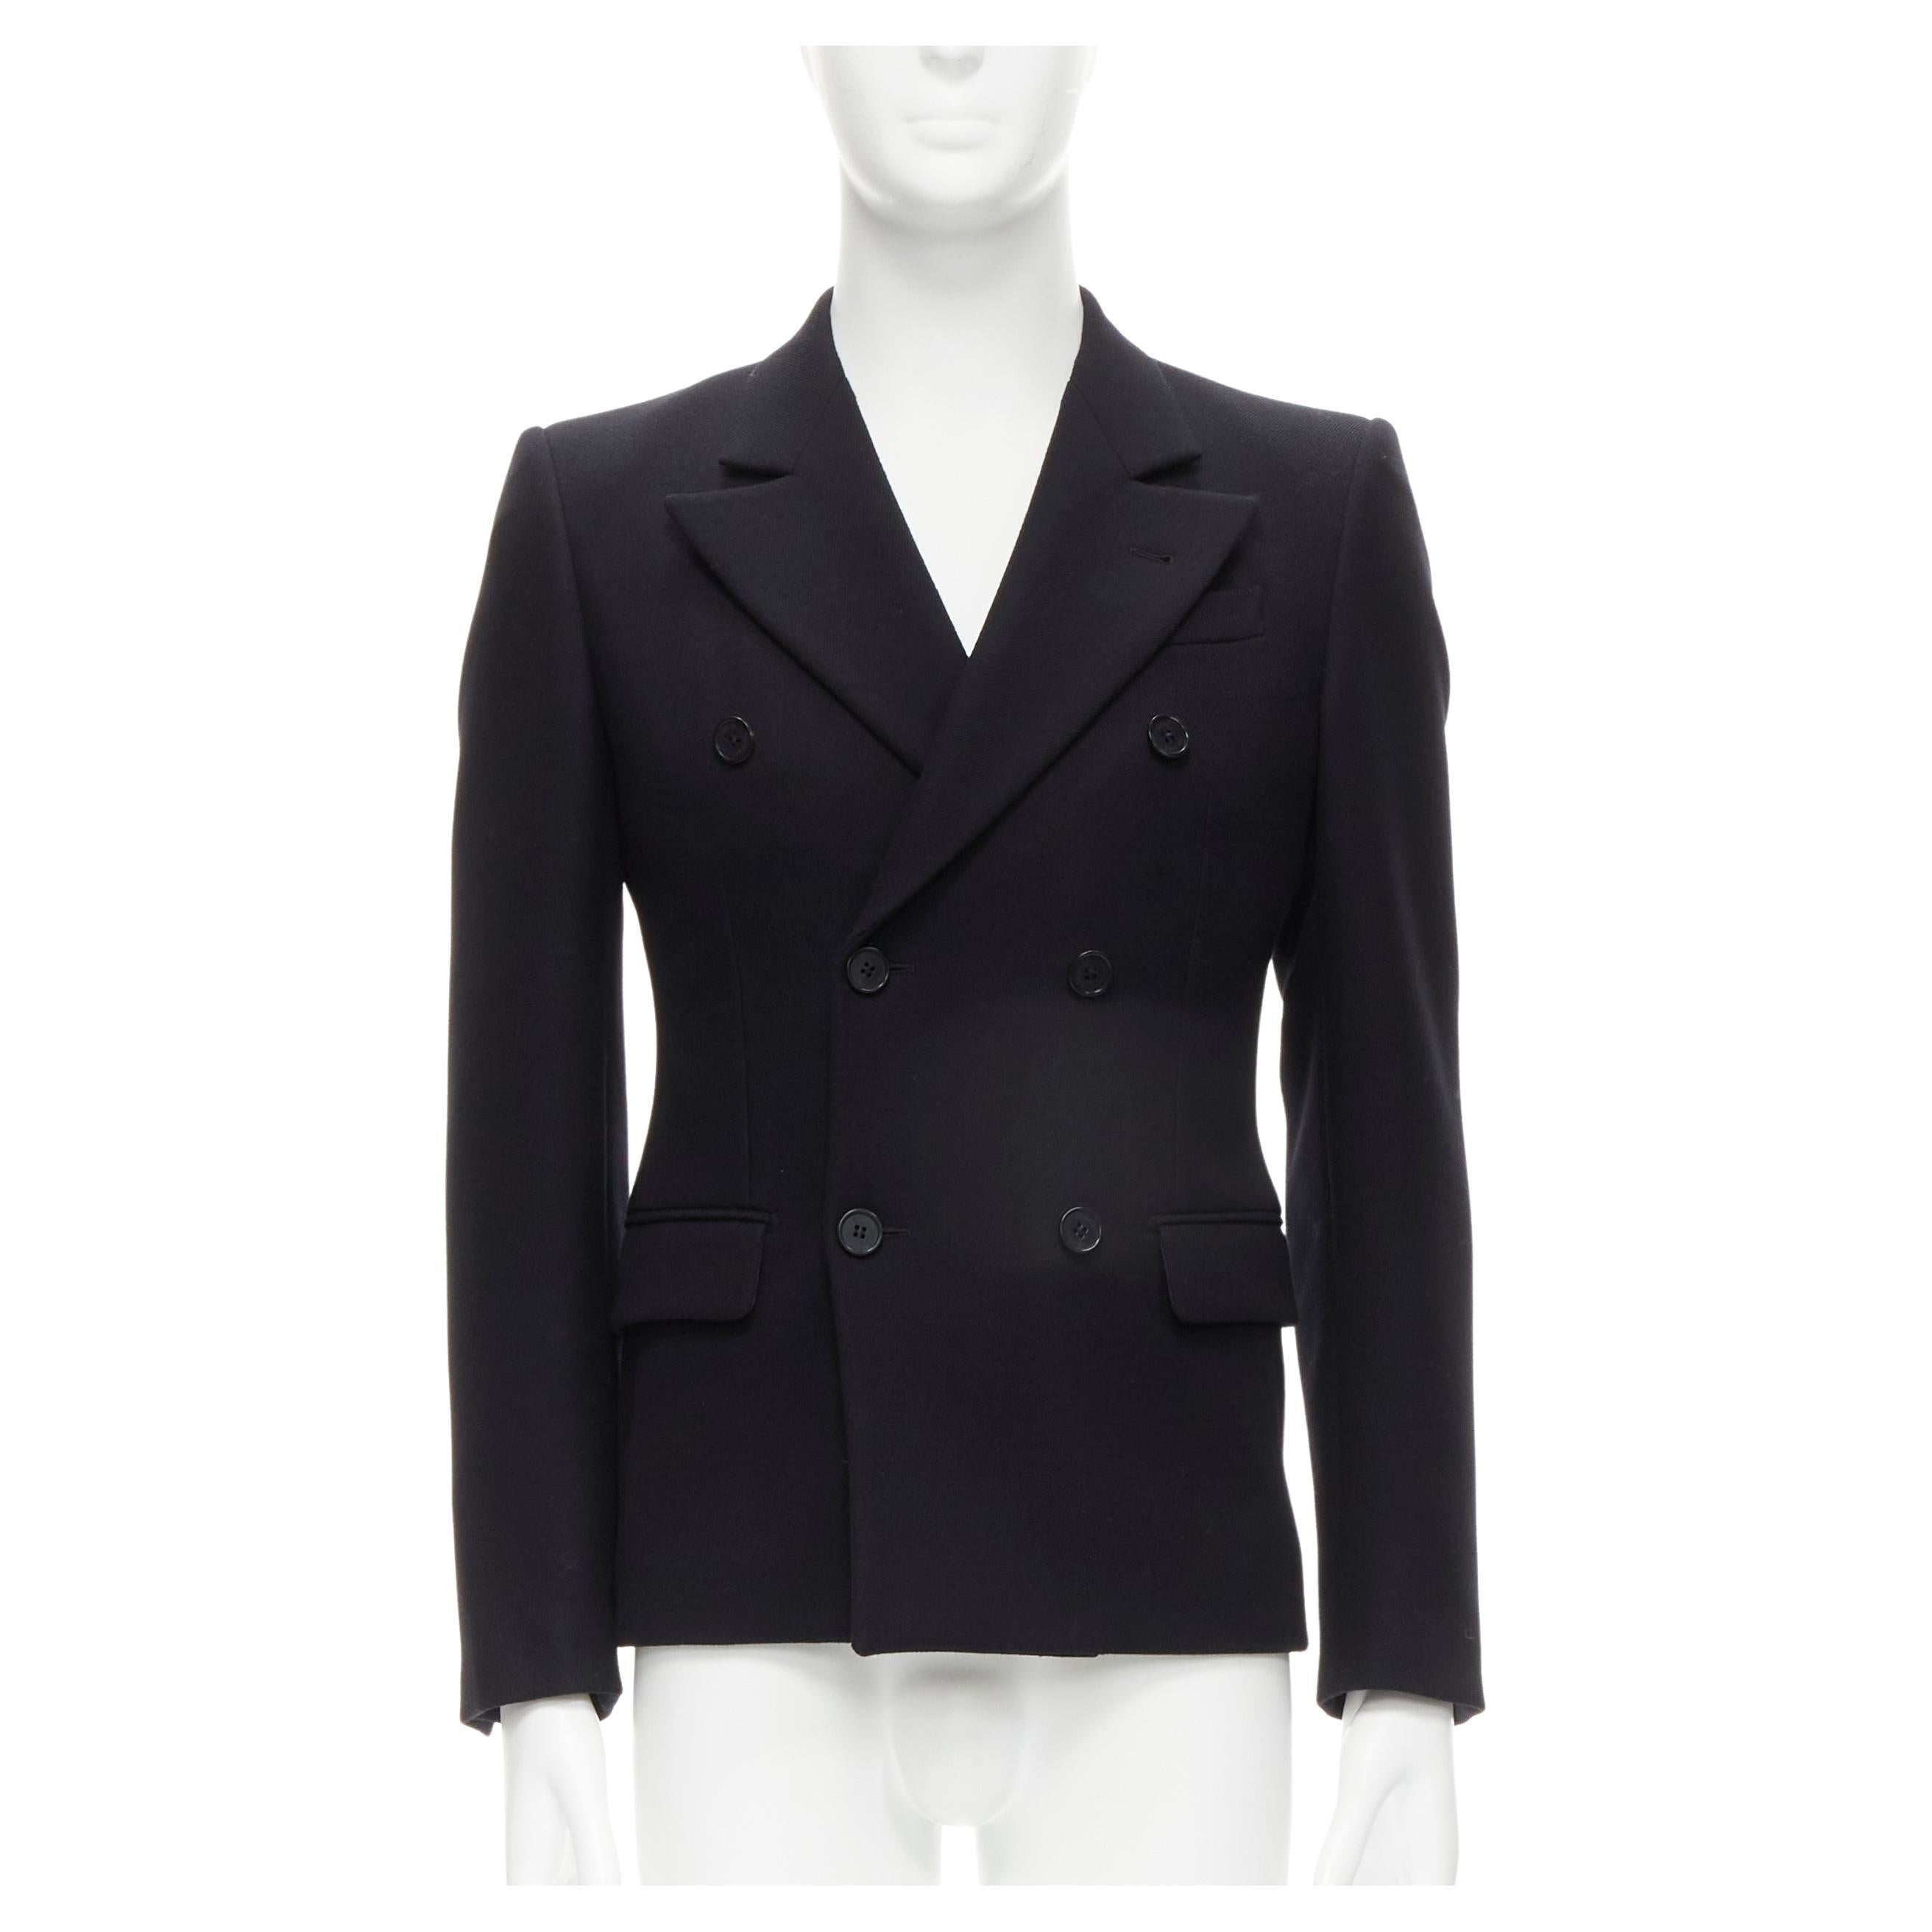 Louis Vuitton Classic Single-Breasted Coat BLACK. Size 46